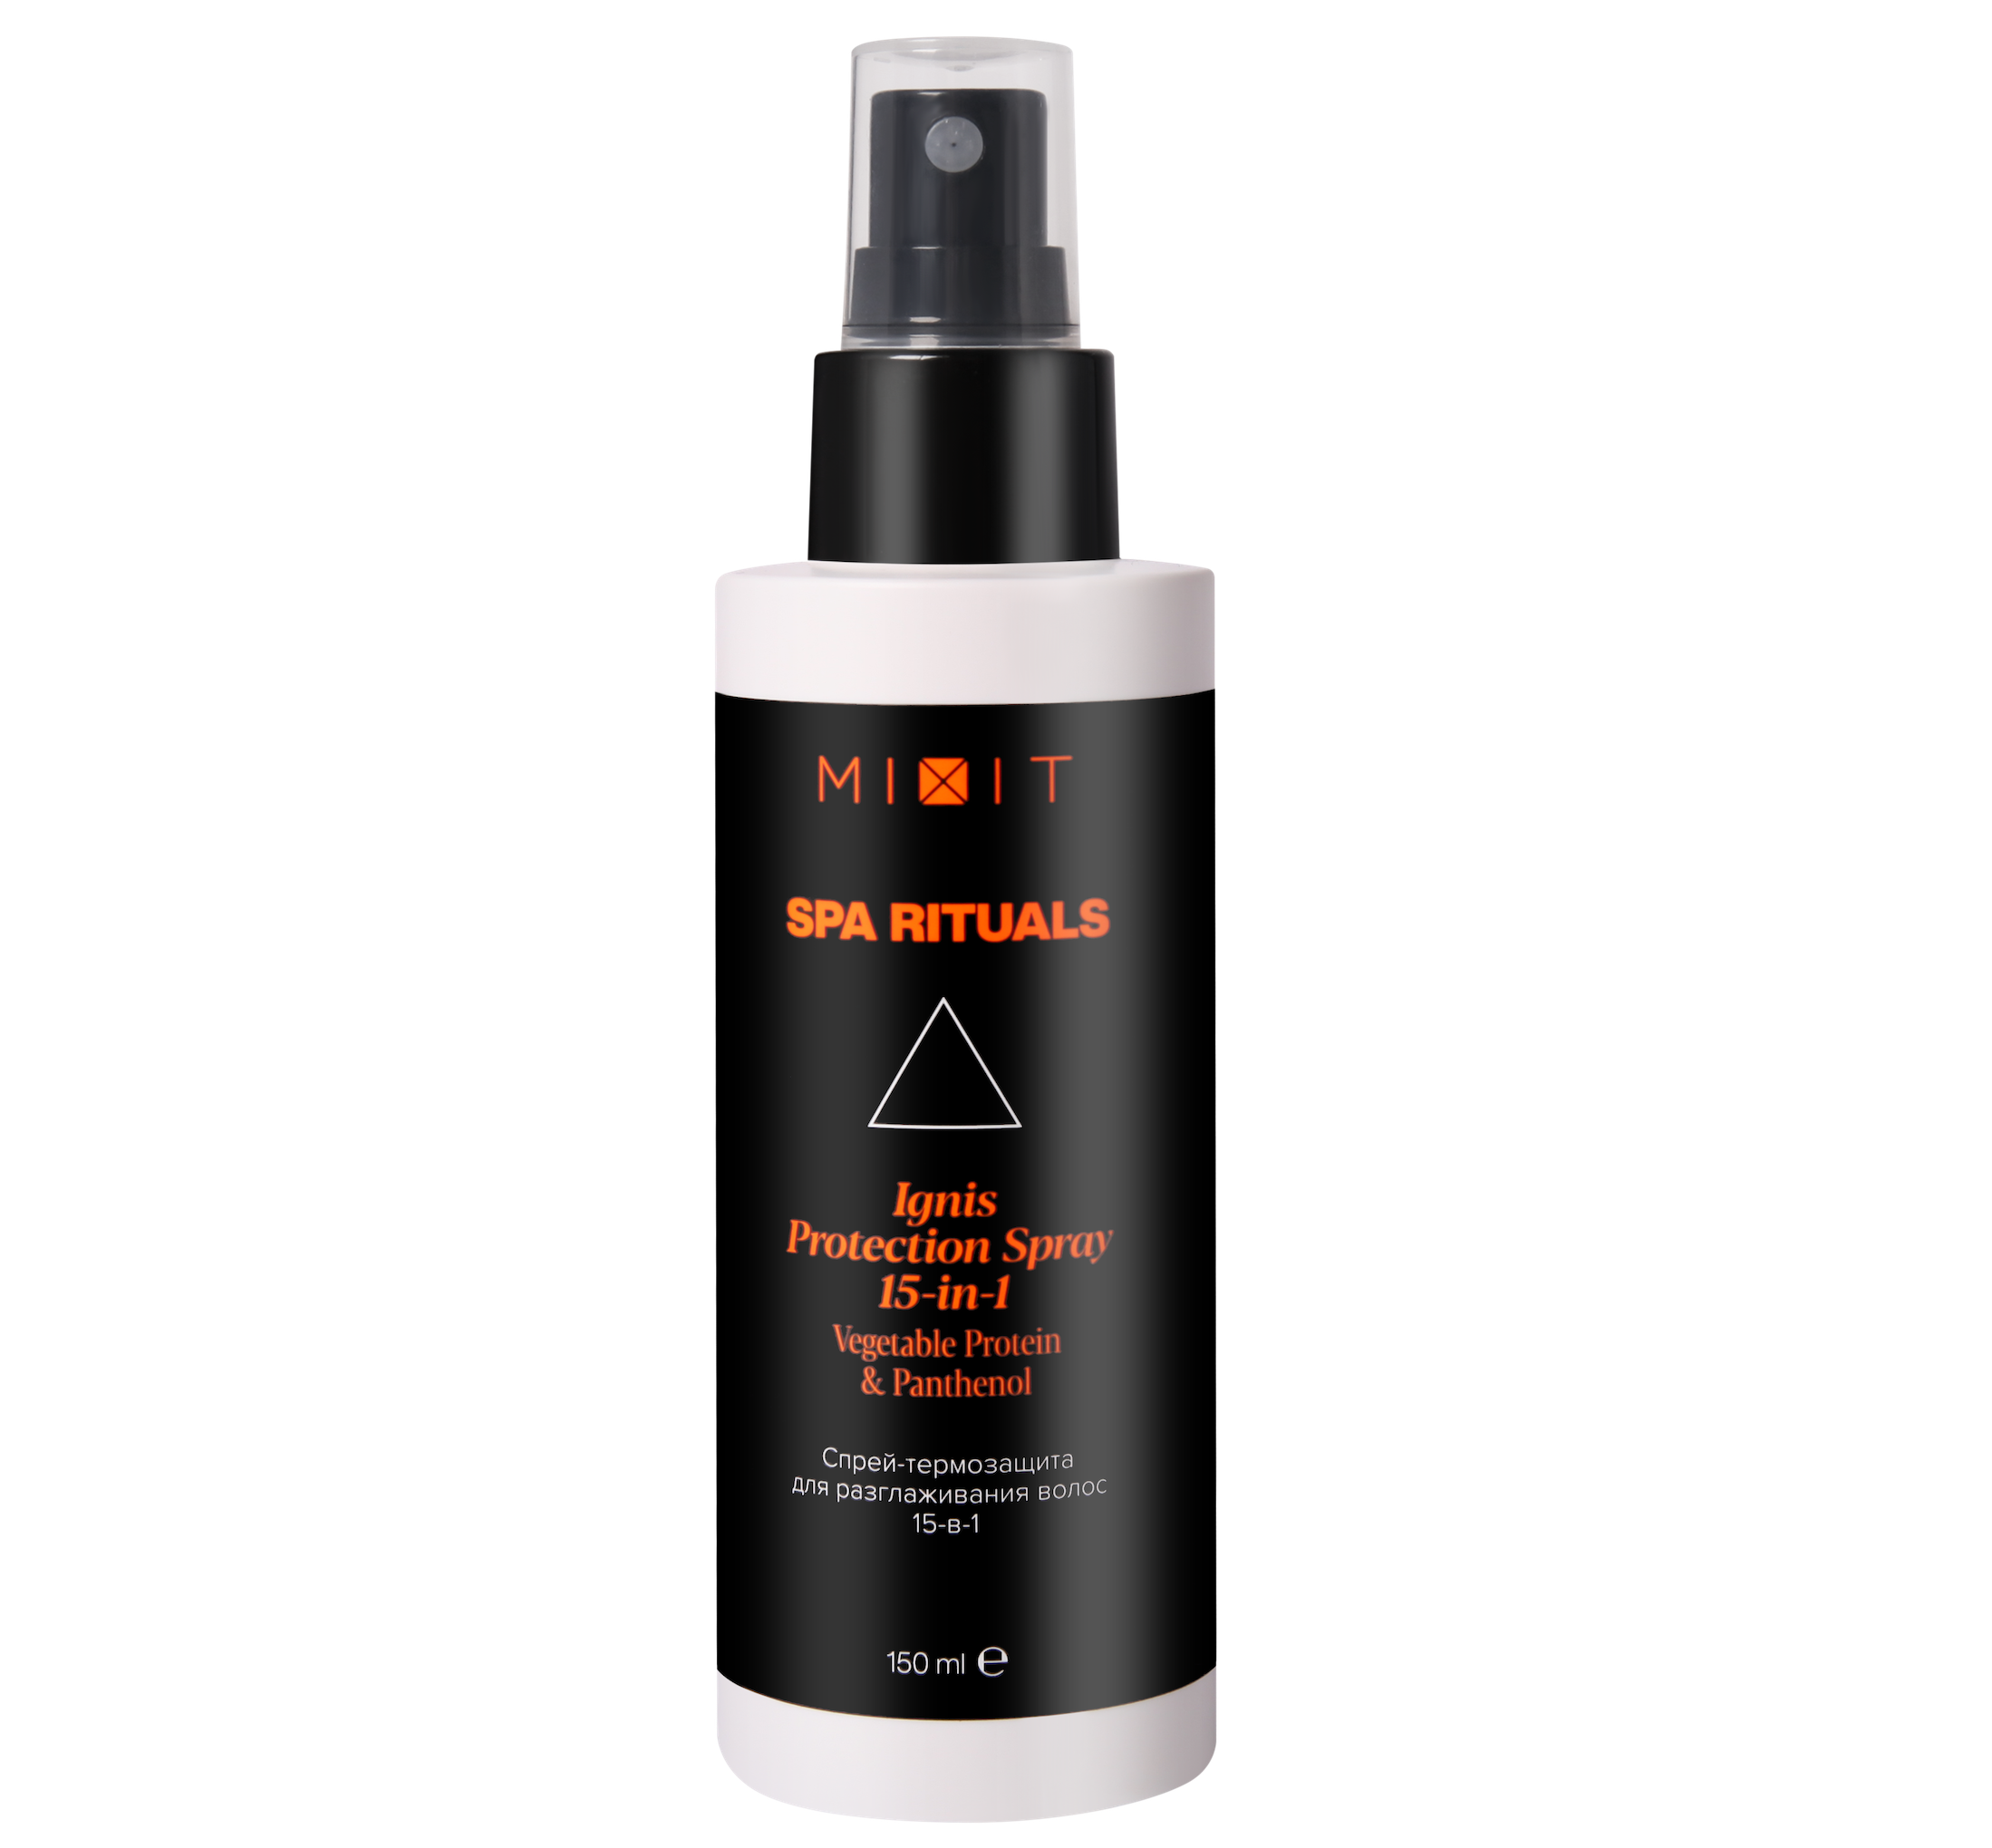 SPA RITUALS Ignis Protection Spray 15 in 1